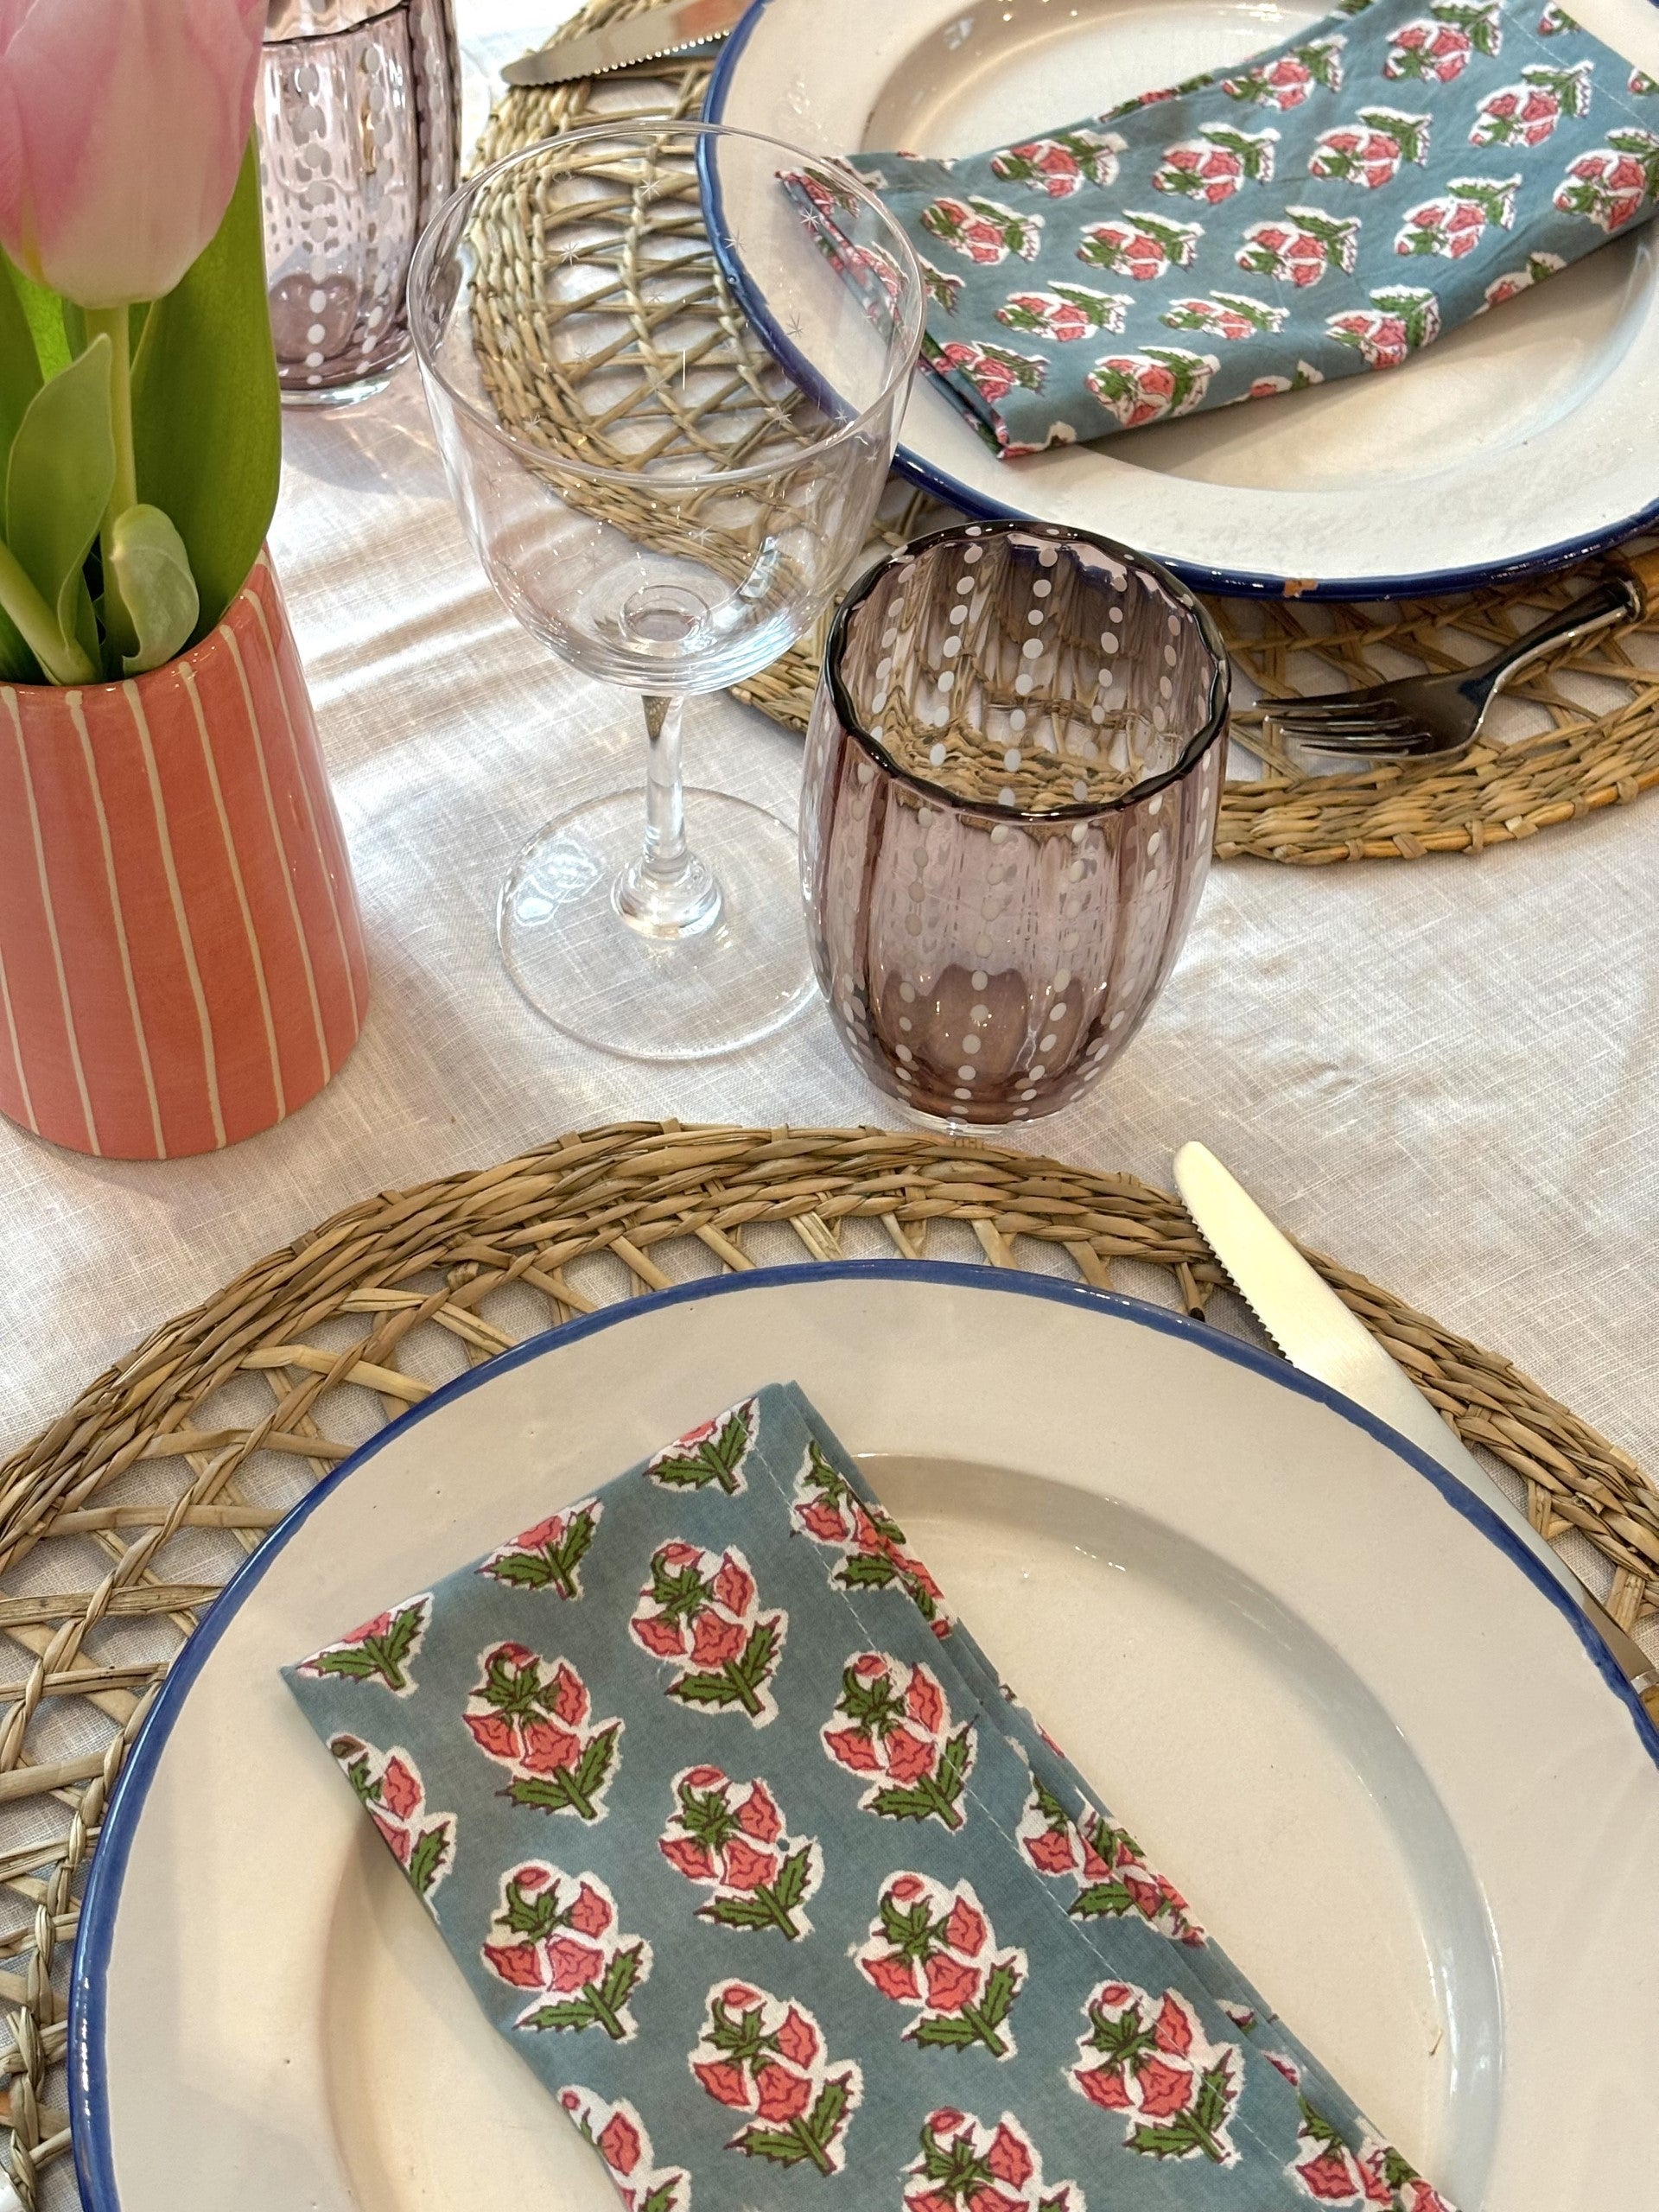 A place setting using wicker placemats and blue and pink floral block printed napkins.